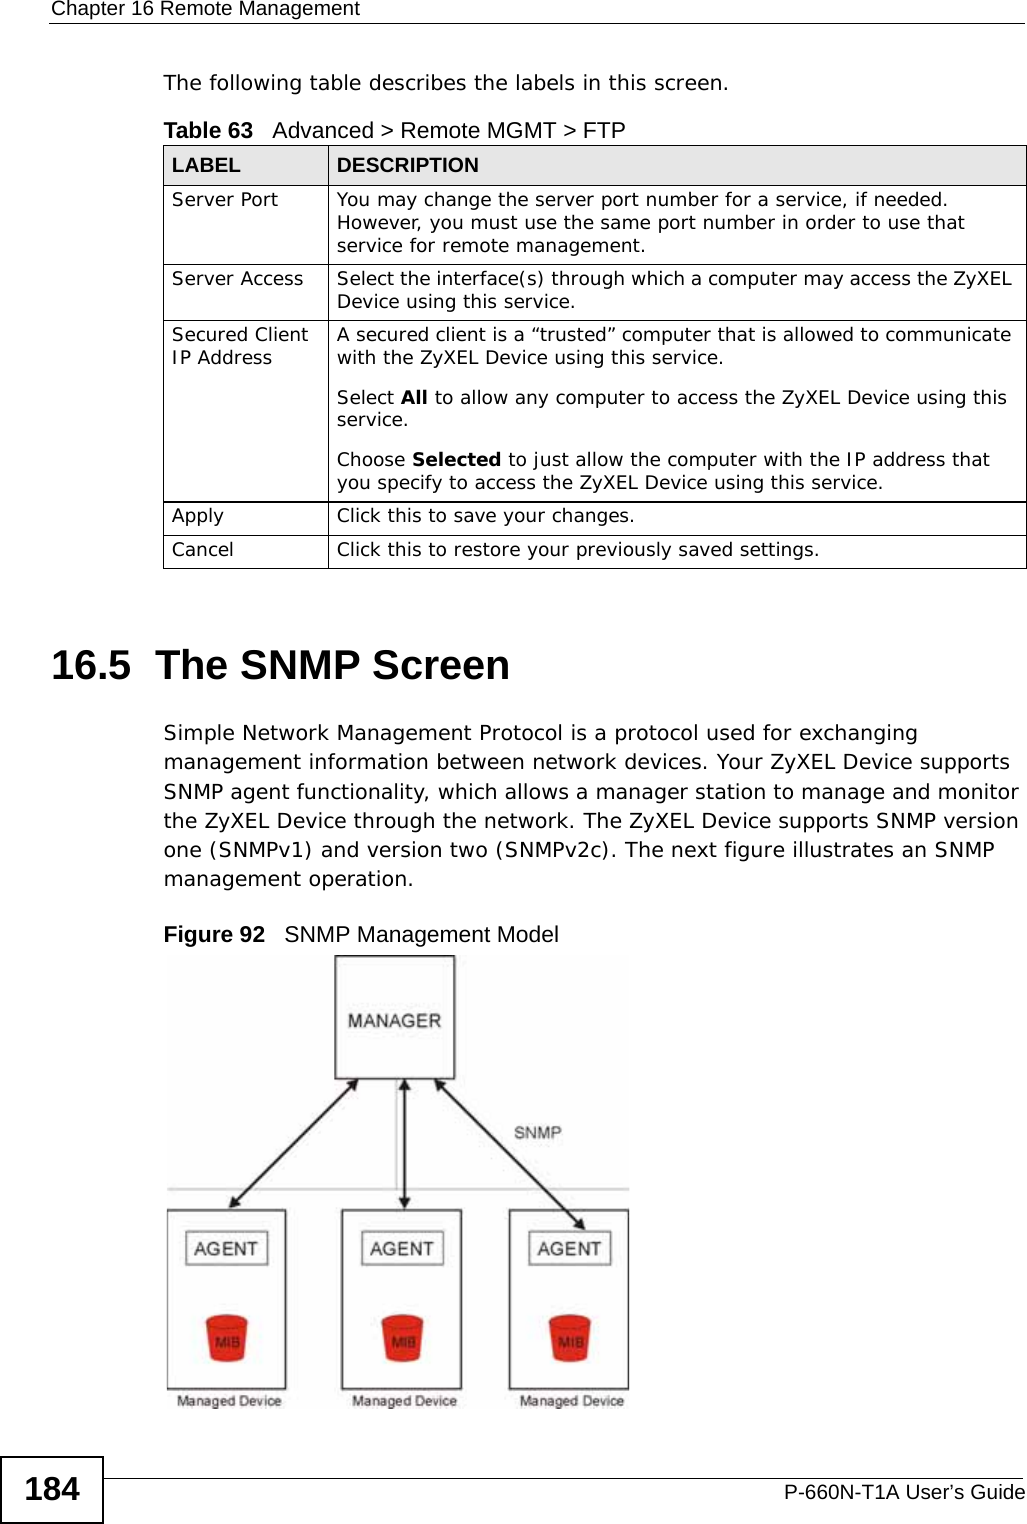 Chapter 16 Remote ManagementP-660N-T1A User’s Guide184The following table describes the labels in this screen. 16.5  The SNMP ScreenSimple Network Management Protocol is a protocol used for exchanging management information between network devices. Your ZyXEL Device supports SNMP agent functionality, which allows a manager station to manage and monitor the ZyXEL Device through the network. The ZyXEL Device supports SNMP version one (SNMPv1) and version two (SNMPv2c). The next figure illustrates an SNMP management operation.Figure 92   SNMP Management ModelTable 63   Advanced &gt; Remote MGMT &gt; FTPLABEL DESCRIPTIONServer Port You may change the server port number for a service, if needed. However, you must use the same port number in order to use that service for remote management.Server Access Select the interface(s) through which a computer may access the ZyXEL Device using this service.Secured Client IP Address A secured client is a “trusted” computer that is allowed to communicate with the ZyXEL Device using this service. Select All to allow any computer to access the ZyXEL Device using this service.Choose Selected to just allow the computer with the IP address that you specify to access the ZyXEL Device using this service.Apply Click this to save your changes.Cancel Click this to restore your previously saved settings.